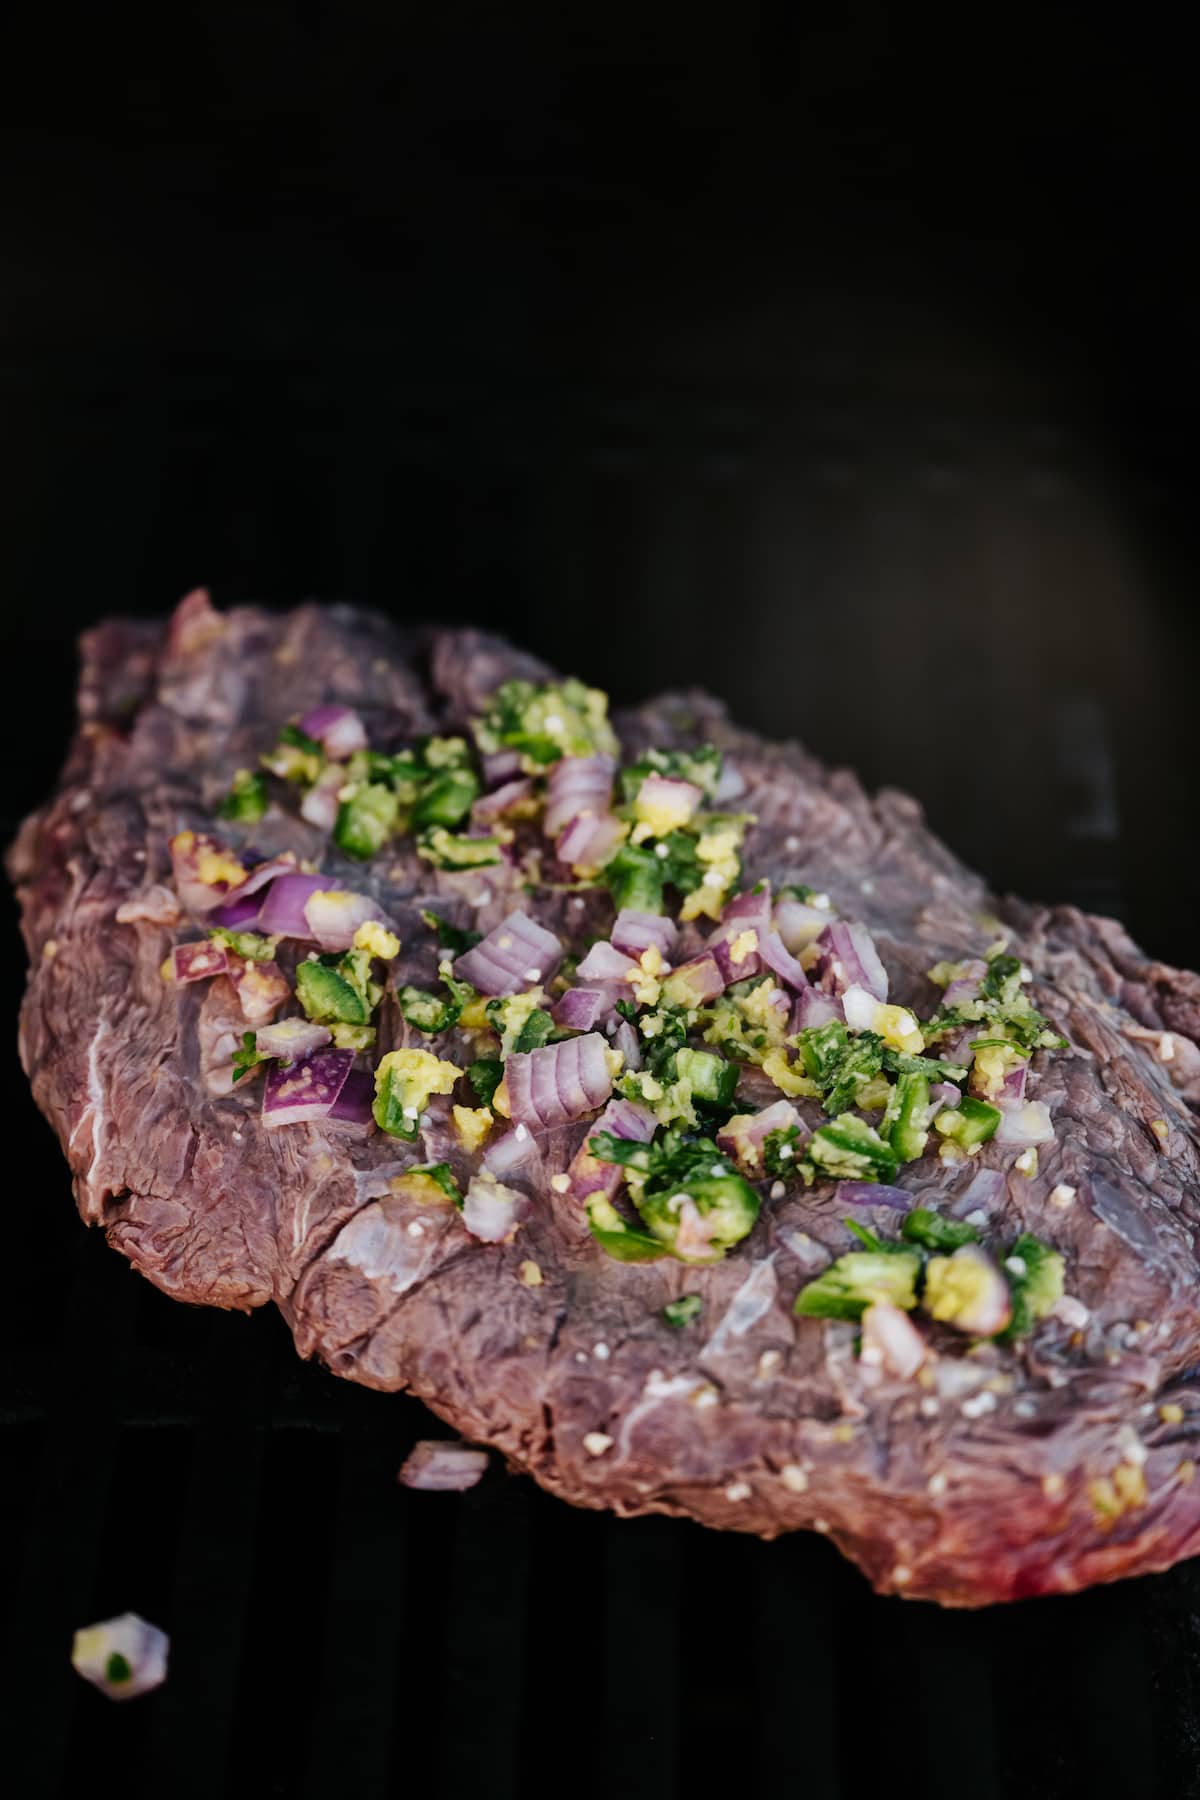 carne asada marinated and grilled flank steak on a black surface.